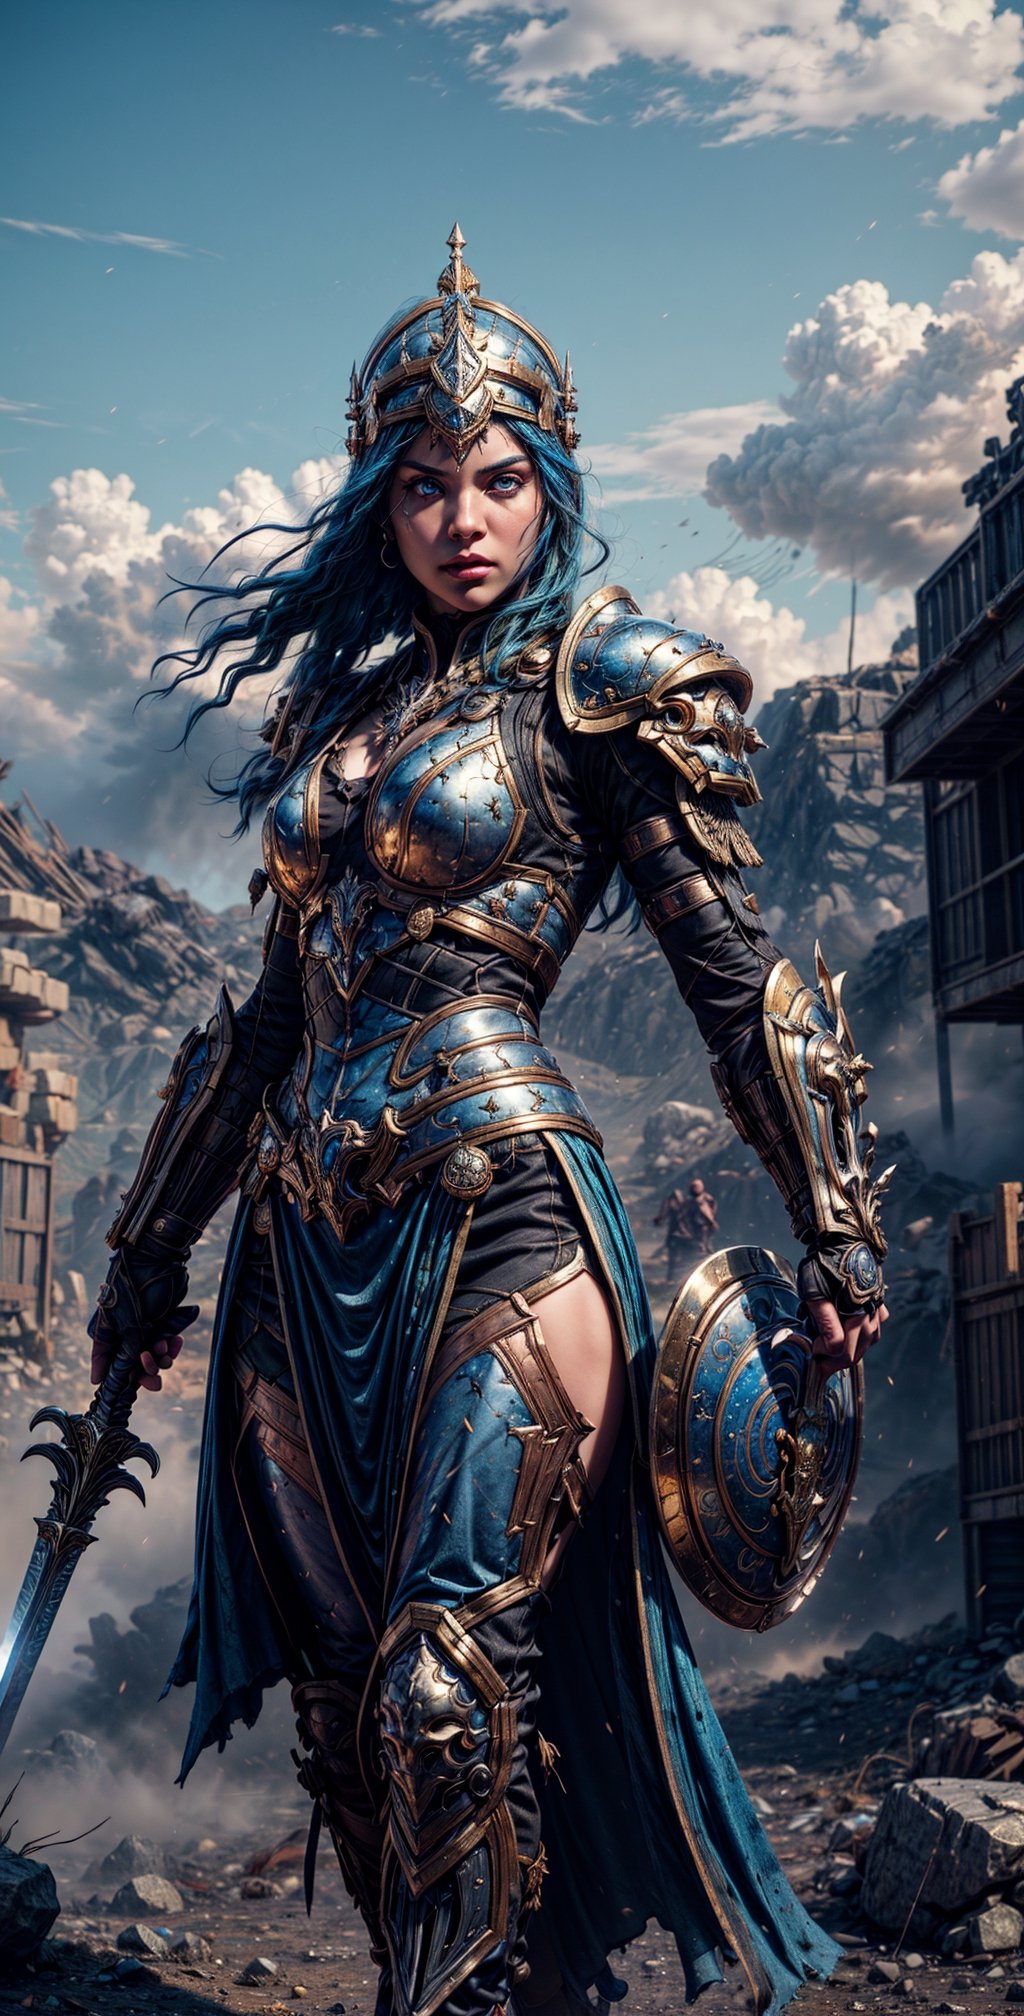  "Create a masterpiece with the best quality, stunning detail, and an extremely detailed 8K Unity wallpaper. It features Athena, the goddess of wisdom, holding a shield in her left hand, a sword in her right hand, adorned with a helmet and armor. She's in an attacking pose, standing on a dusty battlefield with a dark background. Please ensure her eyes are perfectly depicted as vivid blue in this epic scene." Photographic cinematic super super high detailed super realistic image, 4k ultra HDR super high quality image, masterpiece,